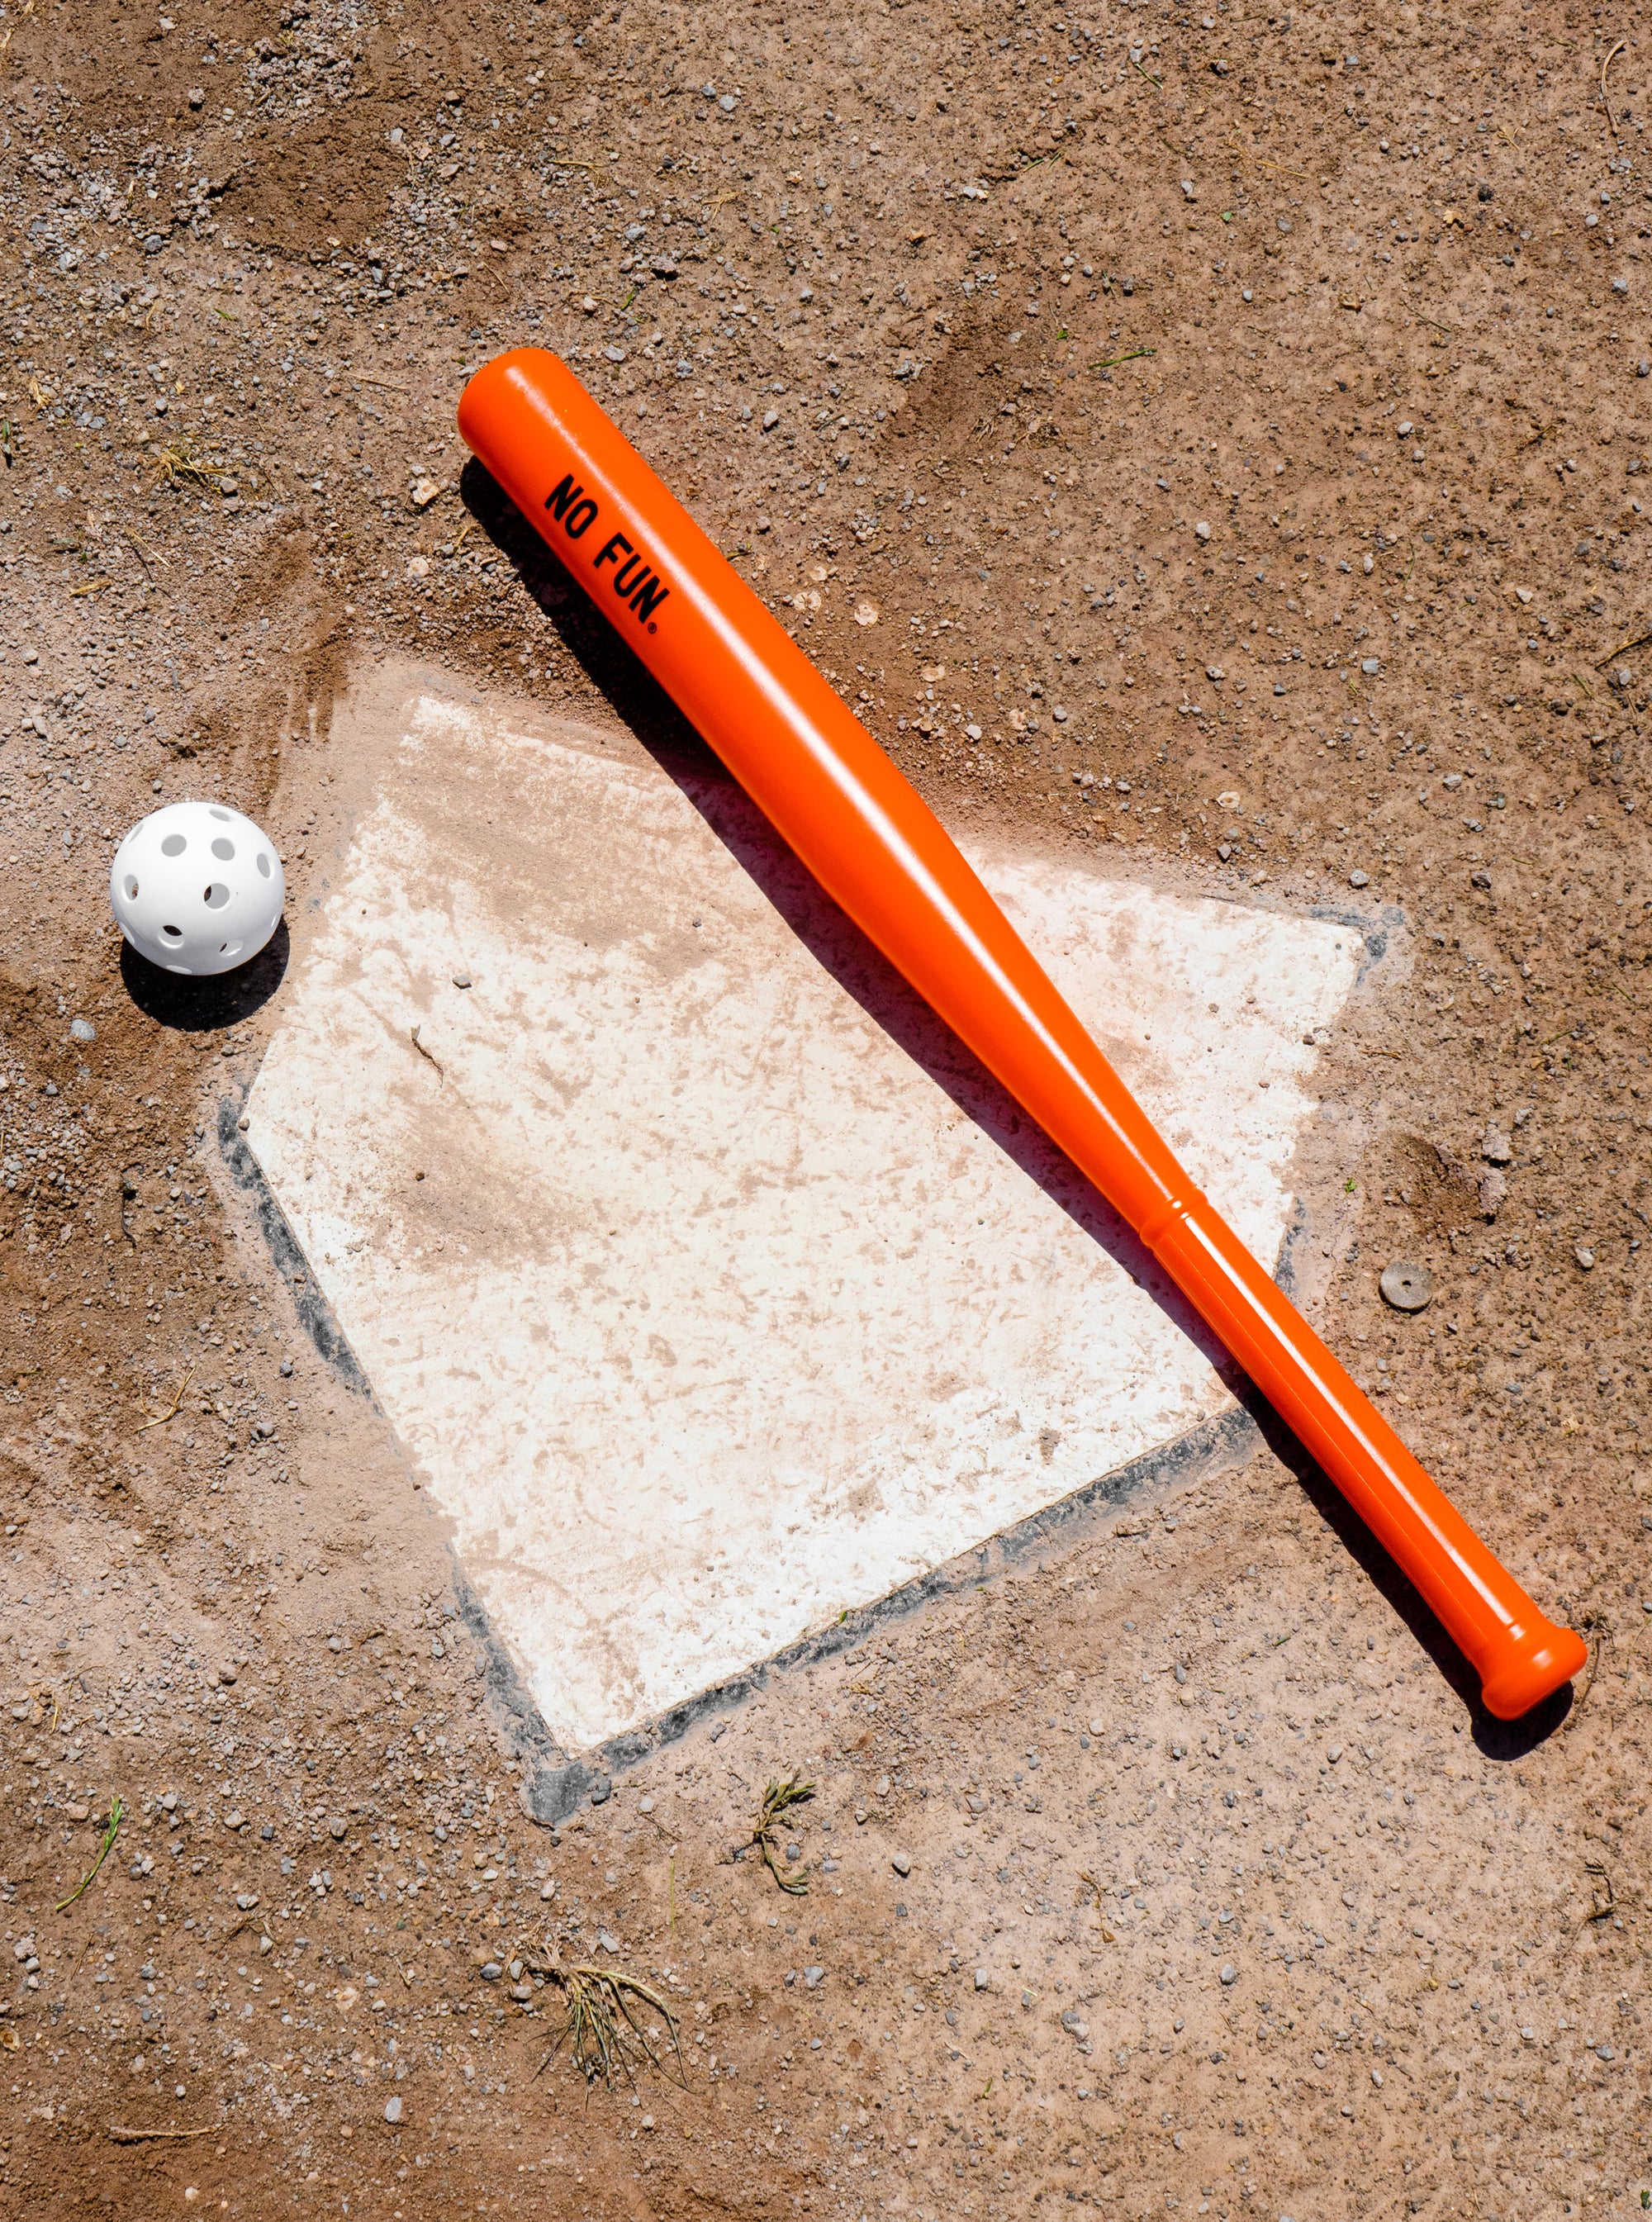 Plastic orange bat with a white ball that has holes laid across home plate.  Looks similar to a wiffle ball and bat set. There is a black No Fun® logo on the barrel of the bat.